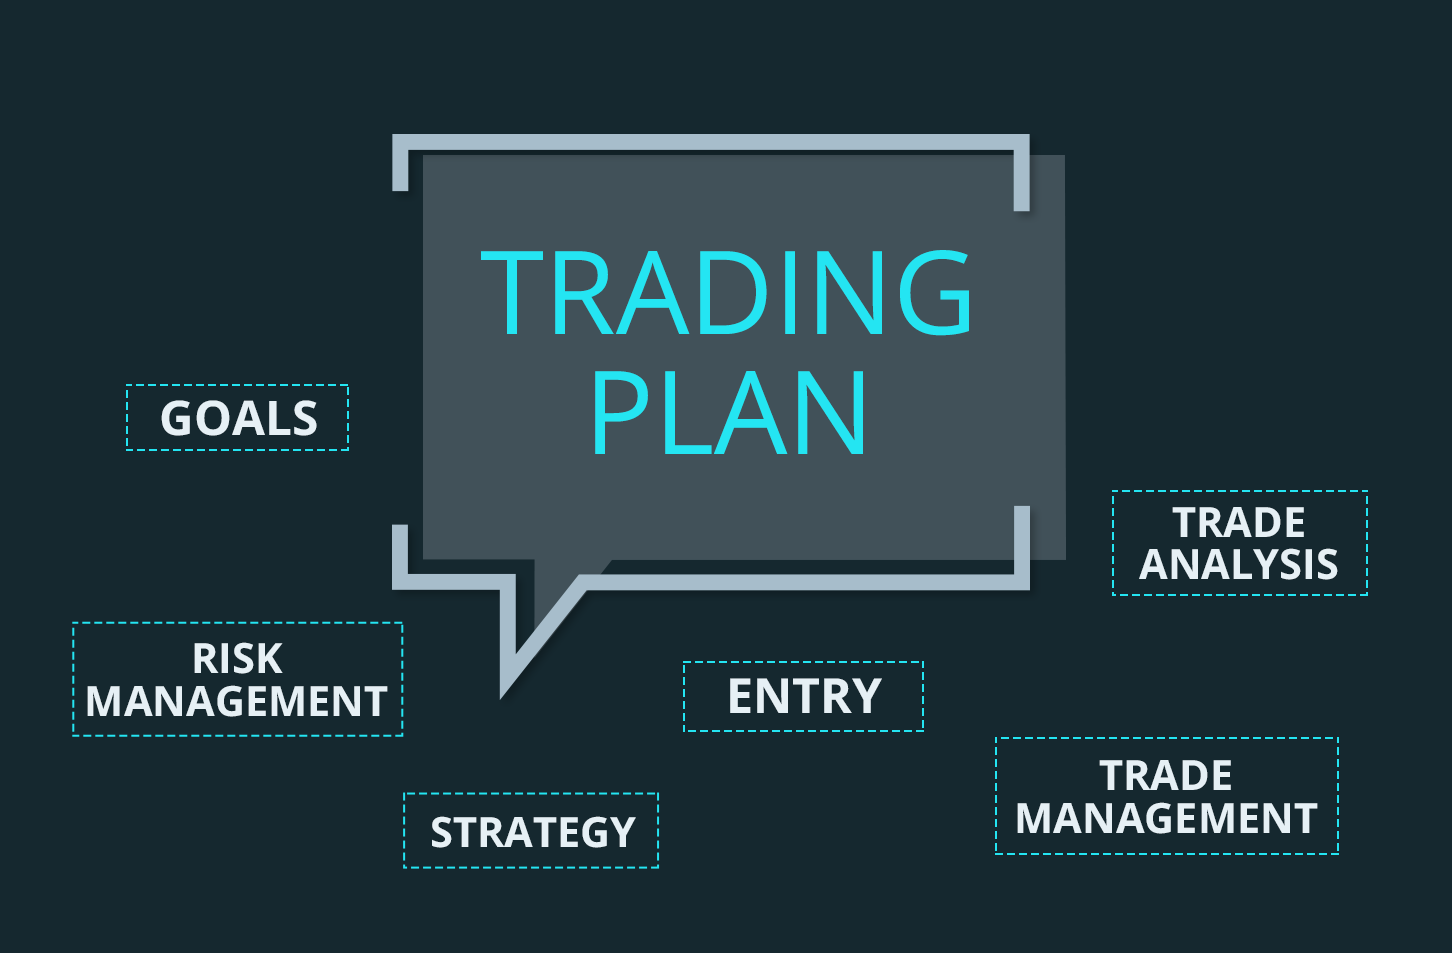 Trading Plan - Kế hoạch Trading trong giao dịch Forex